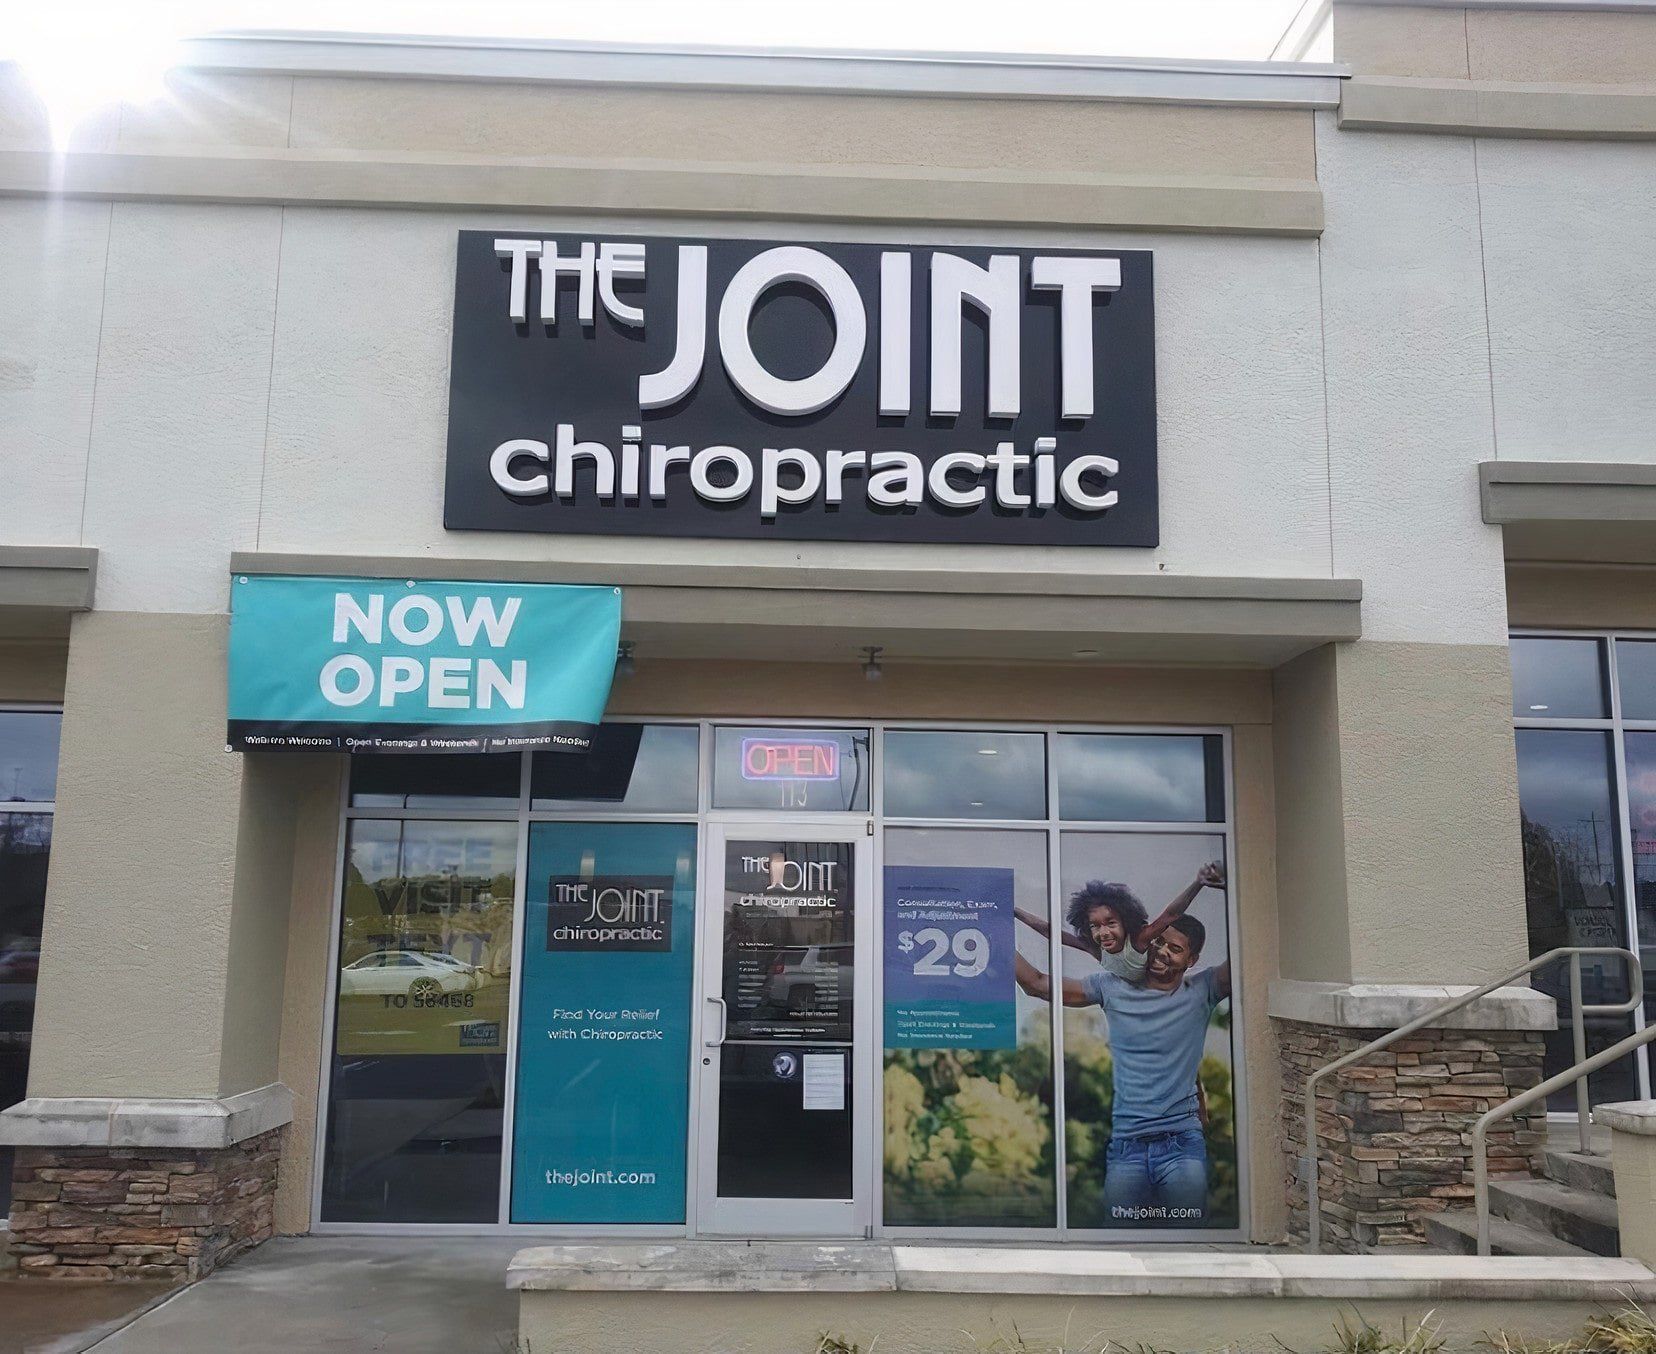 the joint chiropractic - channel letter install in greenville, sc